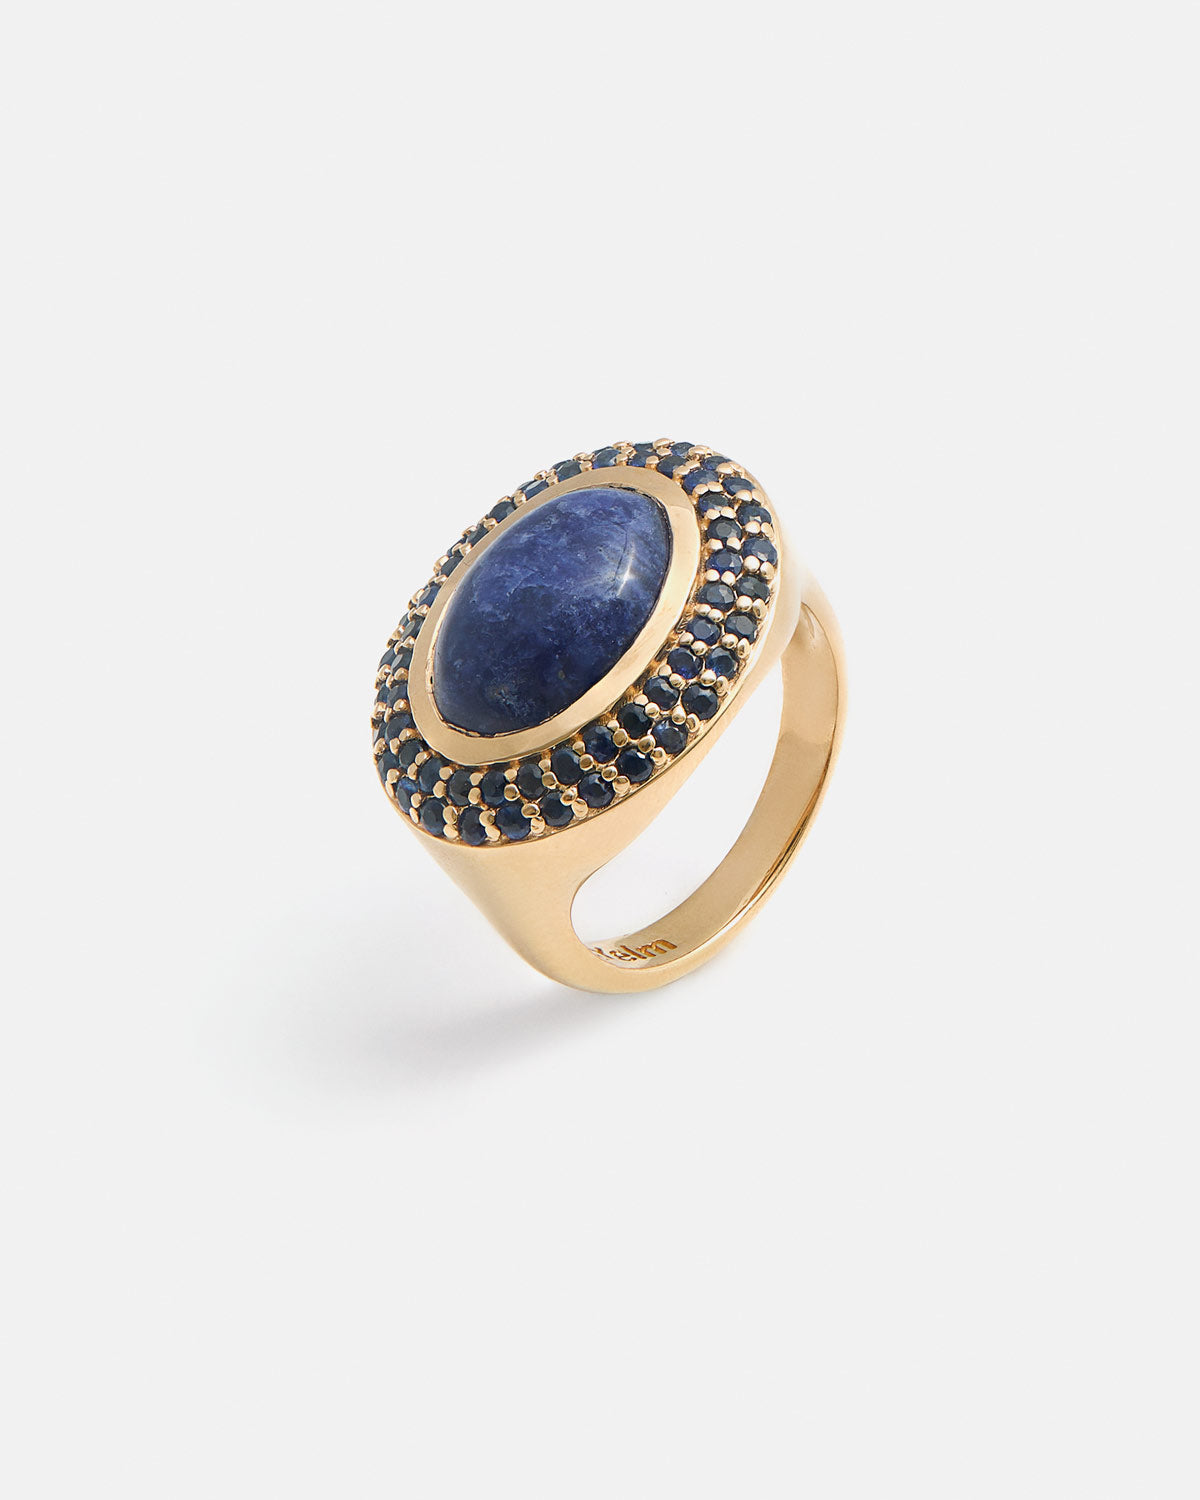 Bane Ring in Yellow Gold with Lapis and Sapphires